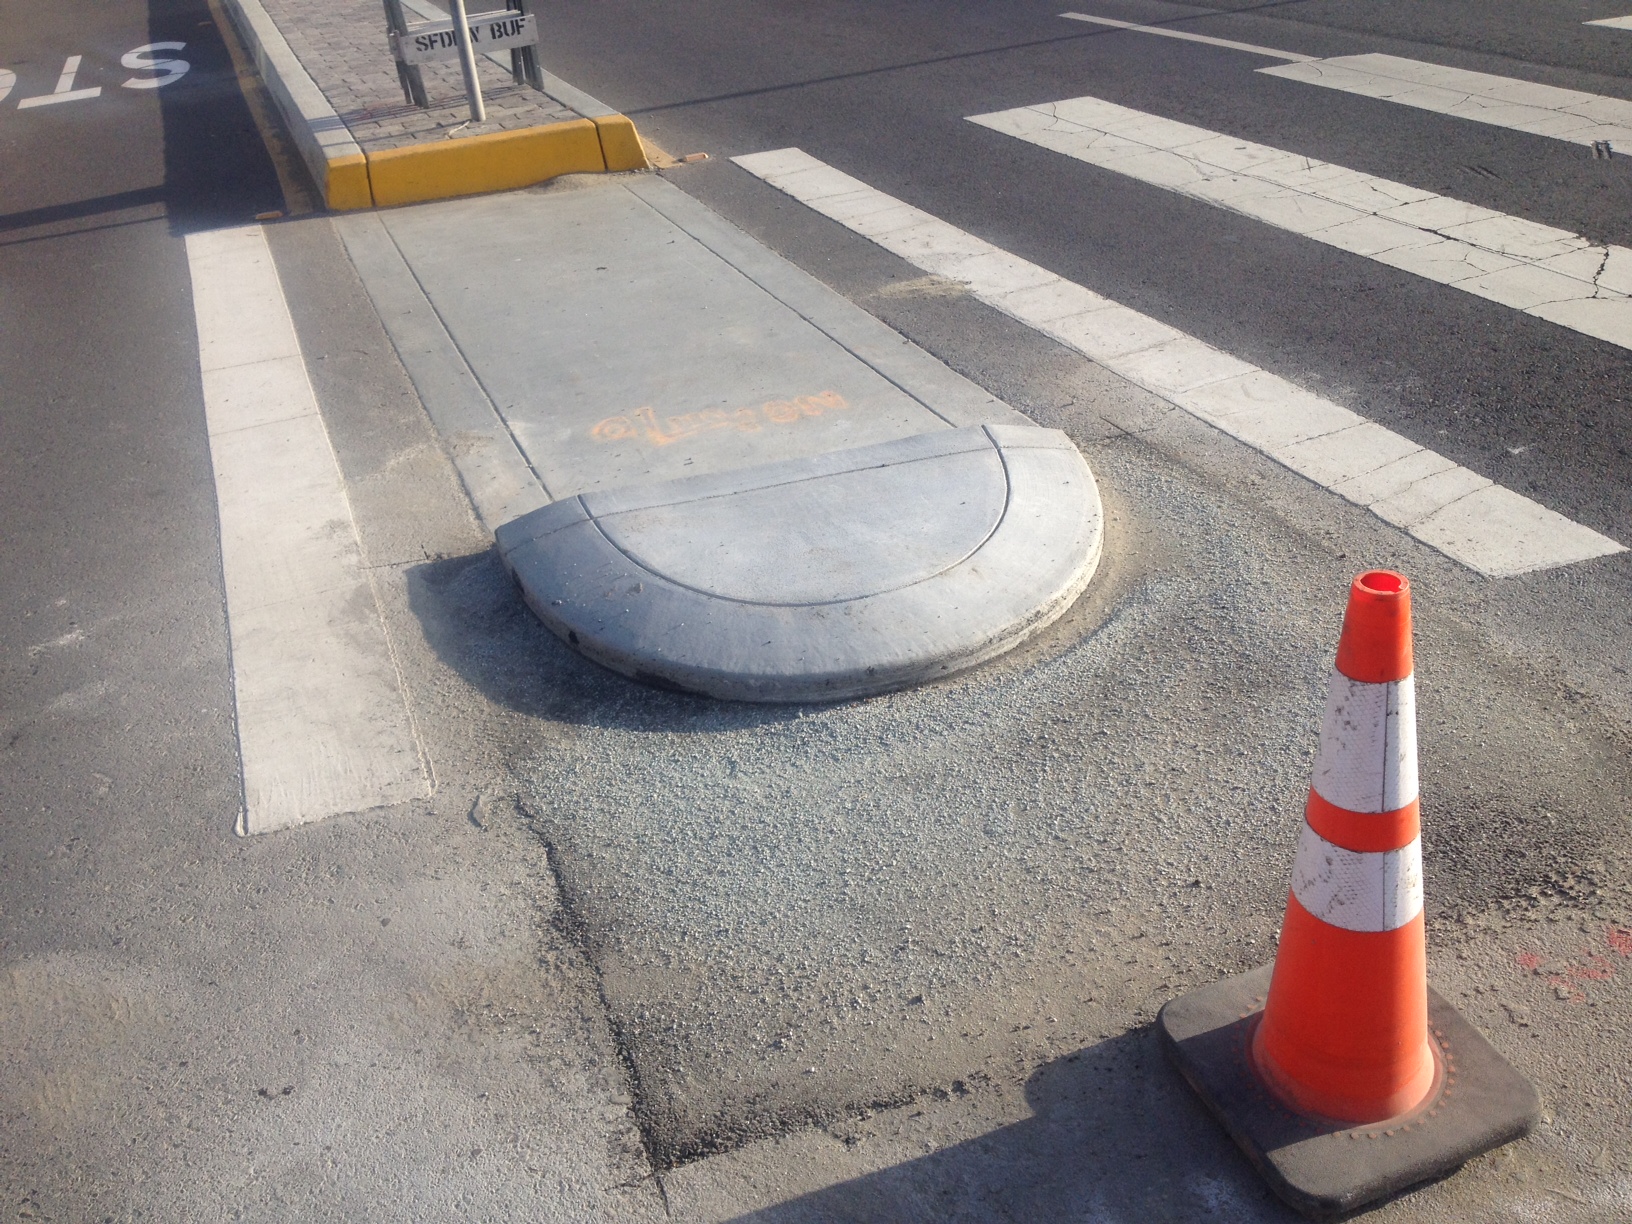 The kinder, gentler median installed by SFMTA at Great Highway and Balboa